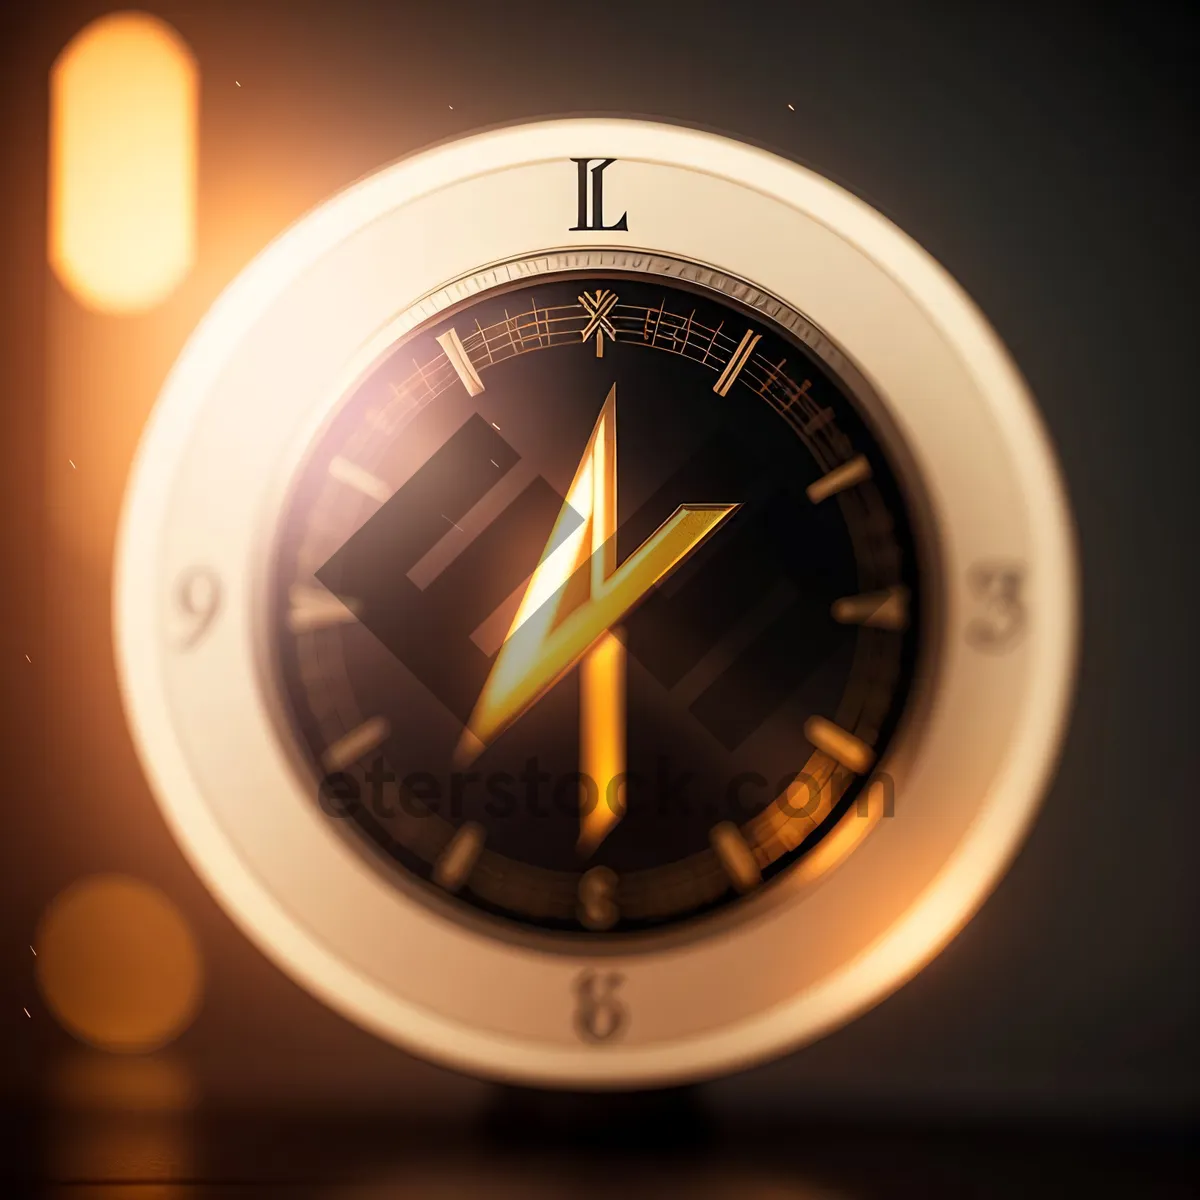 Picture of Shiny Modern Analog Clock Icon: Time Indicator